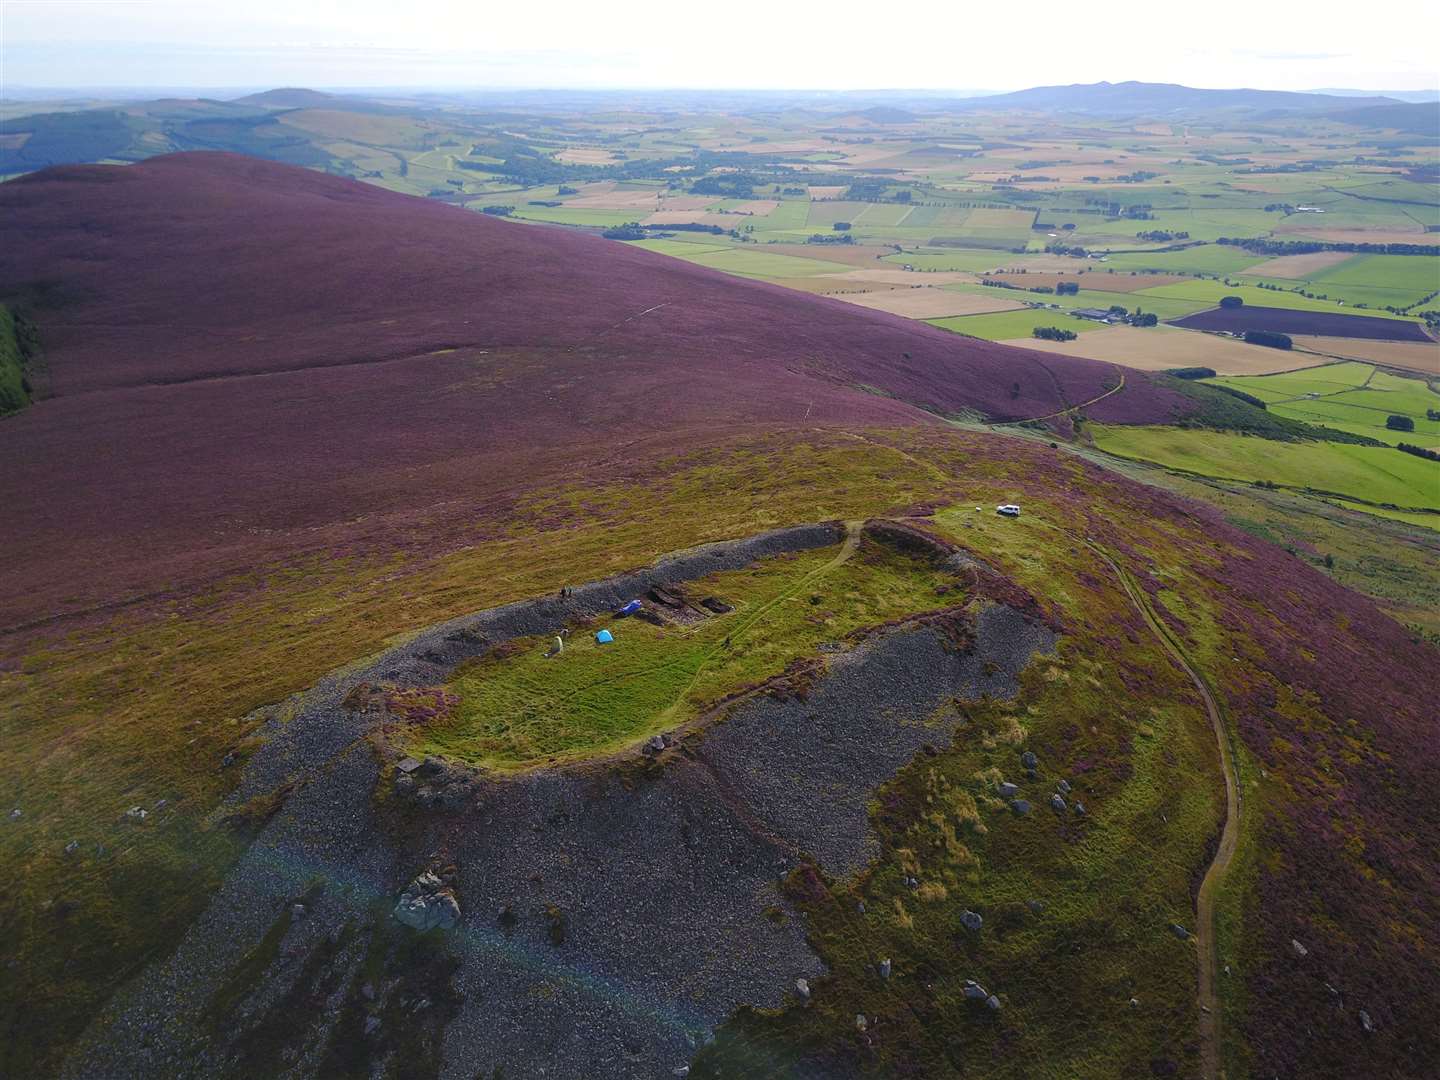 A Pictish settlement at the Tap O' Noth hill near Rhynie.